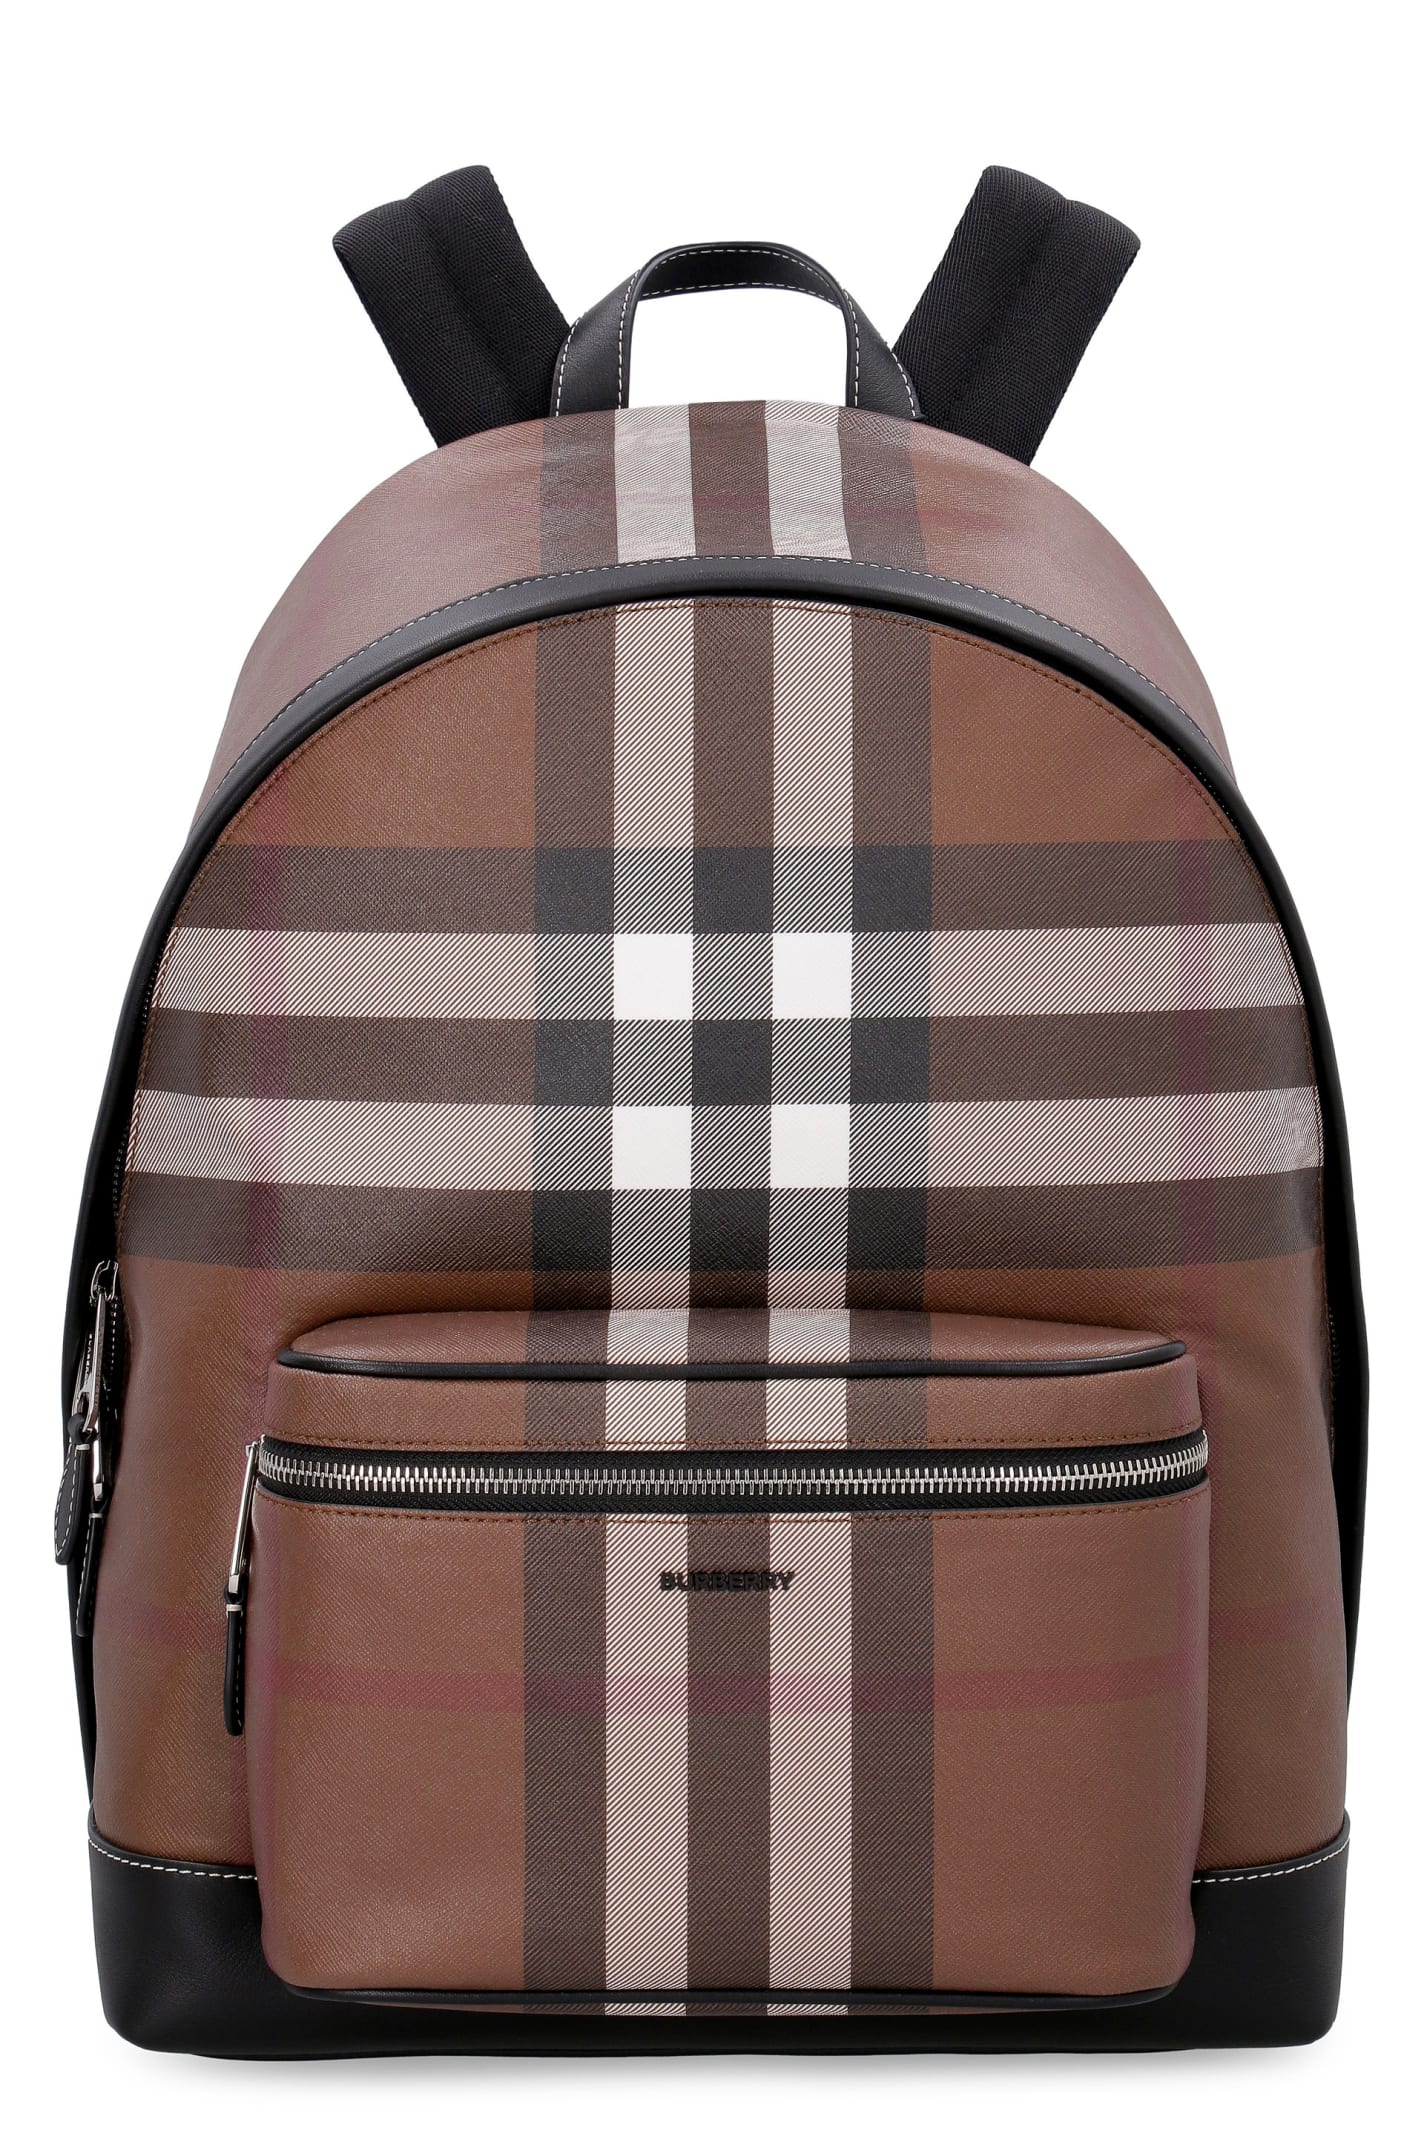 Burberry Leather And Canvas Backpack